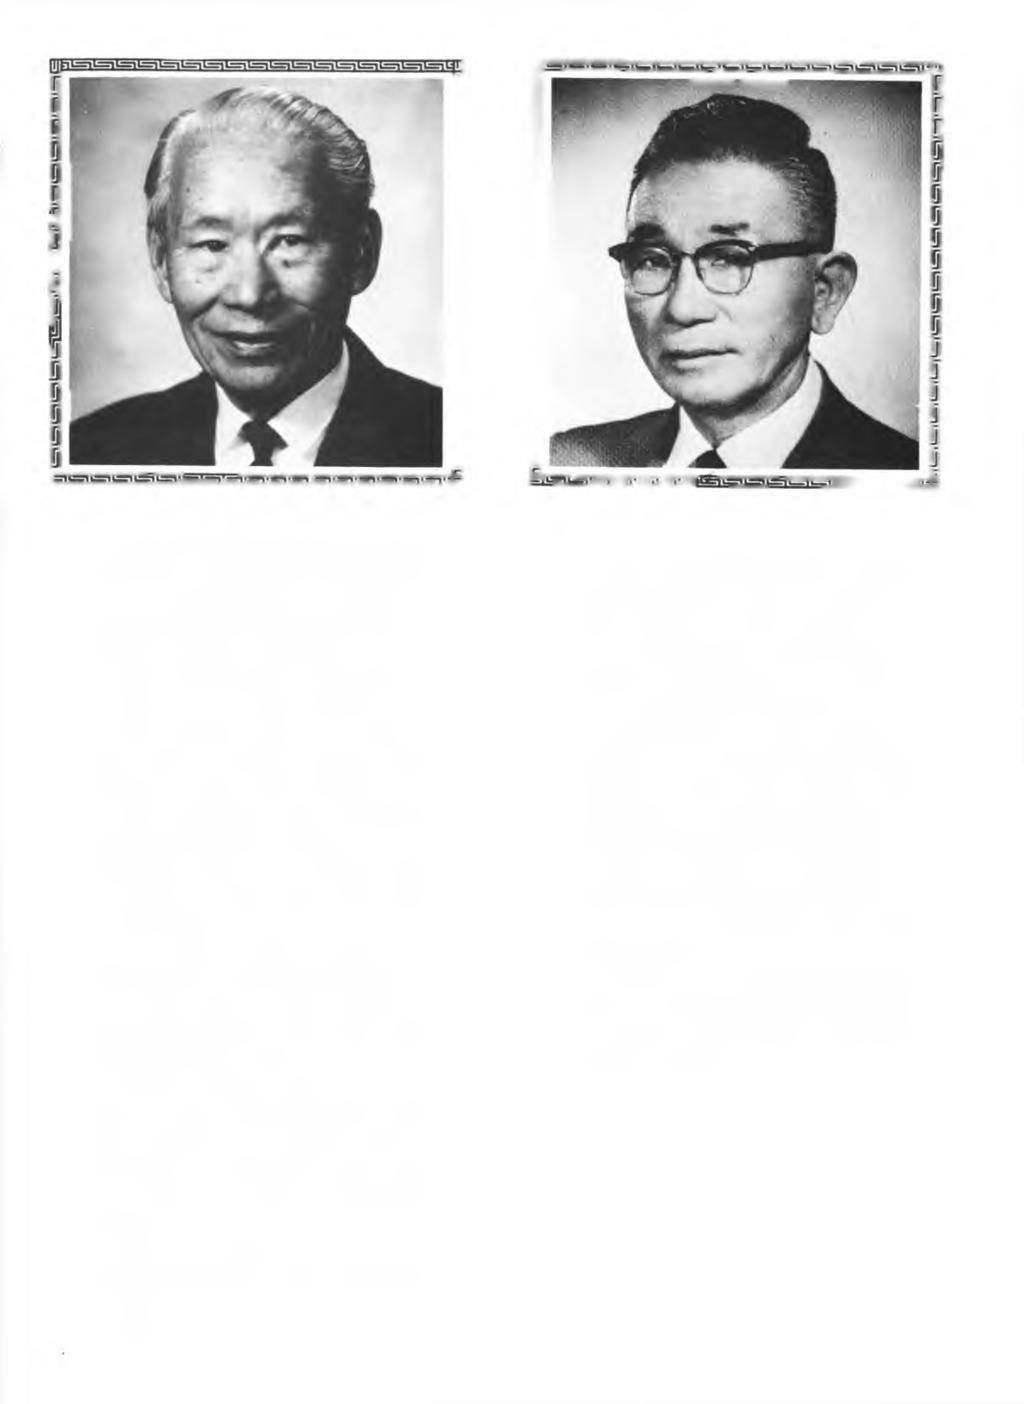 HARVEY S. KAWAKAMI Harvey S. Kawakami istreasurer and general manager of H. S. Kawakami Stores, Ltd, and Commercial Properties, Ltd., chairm an of the board and a director of Big Save, Inc.